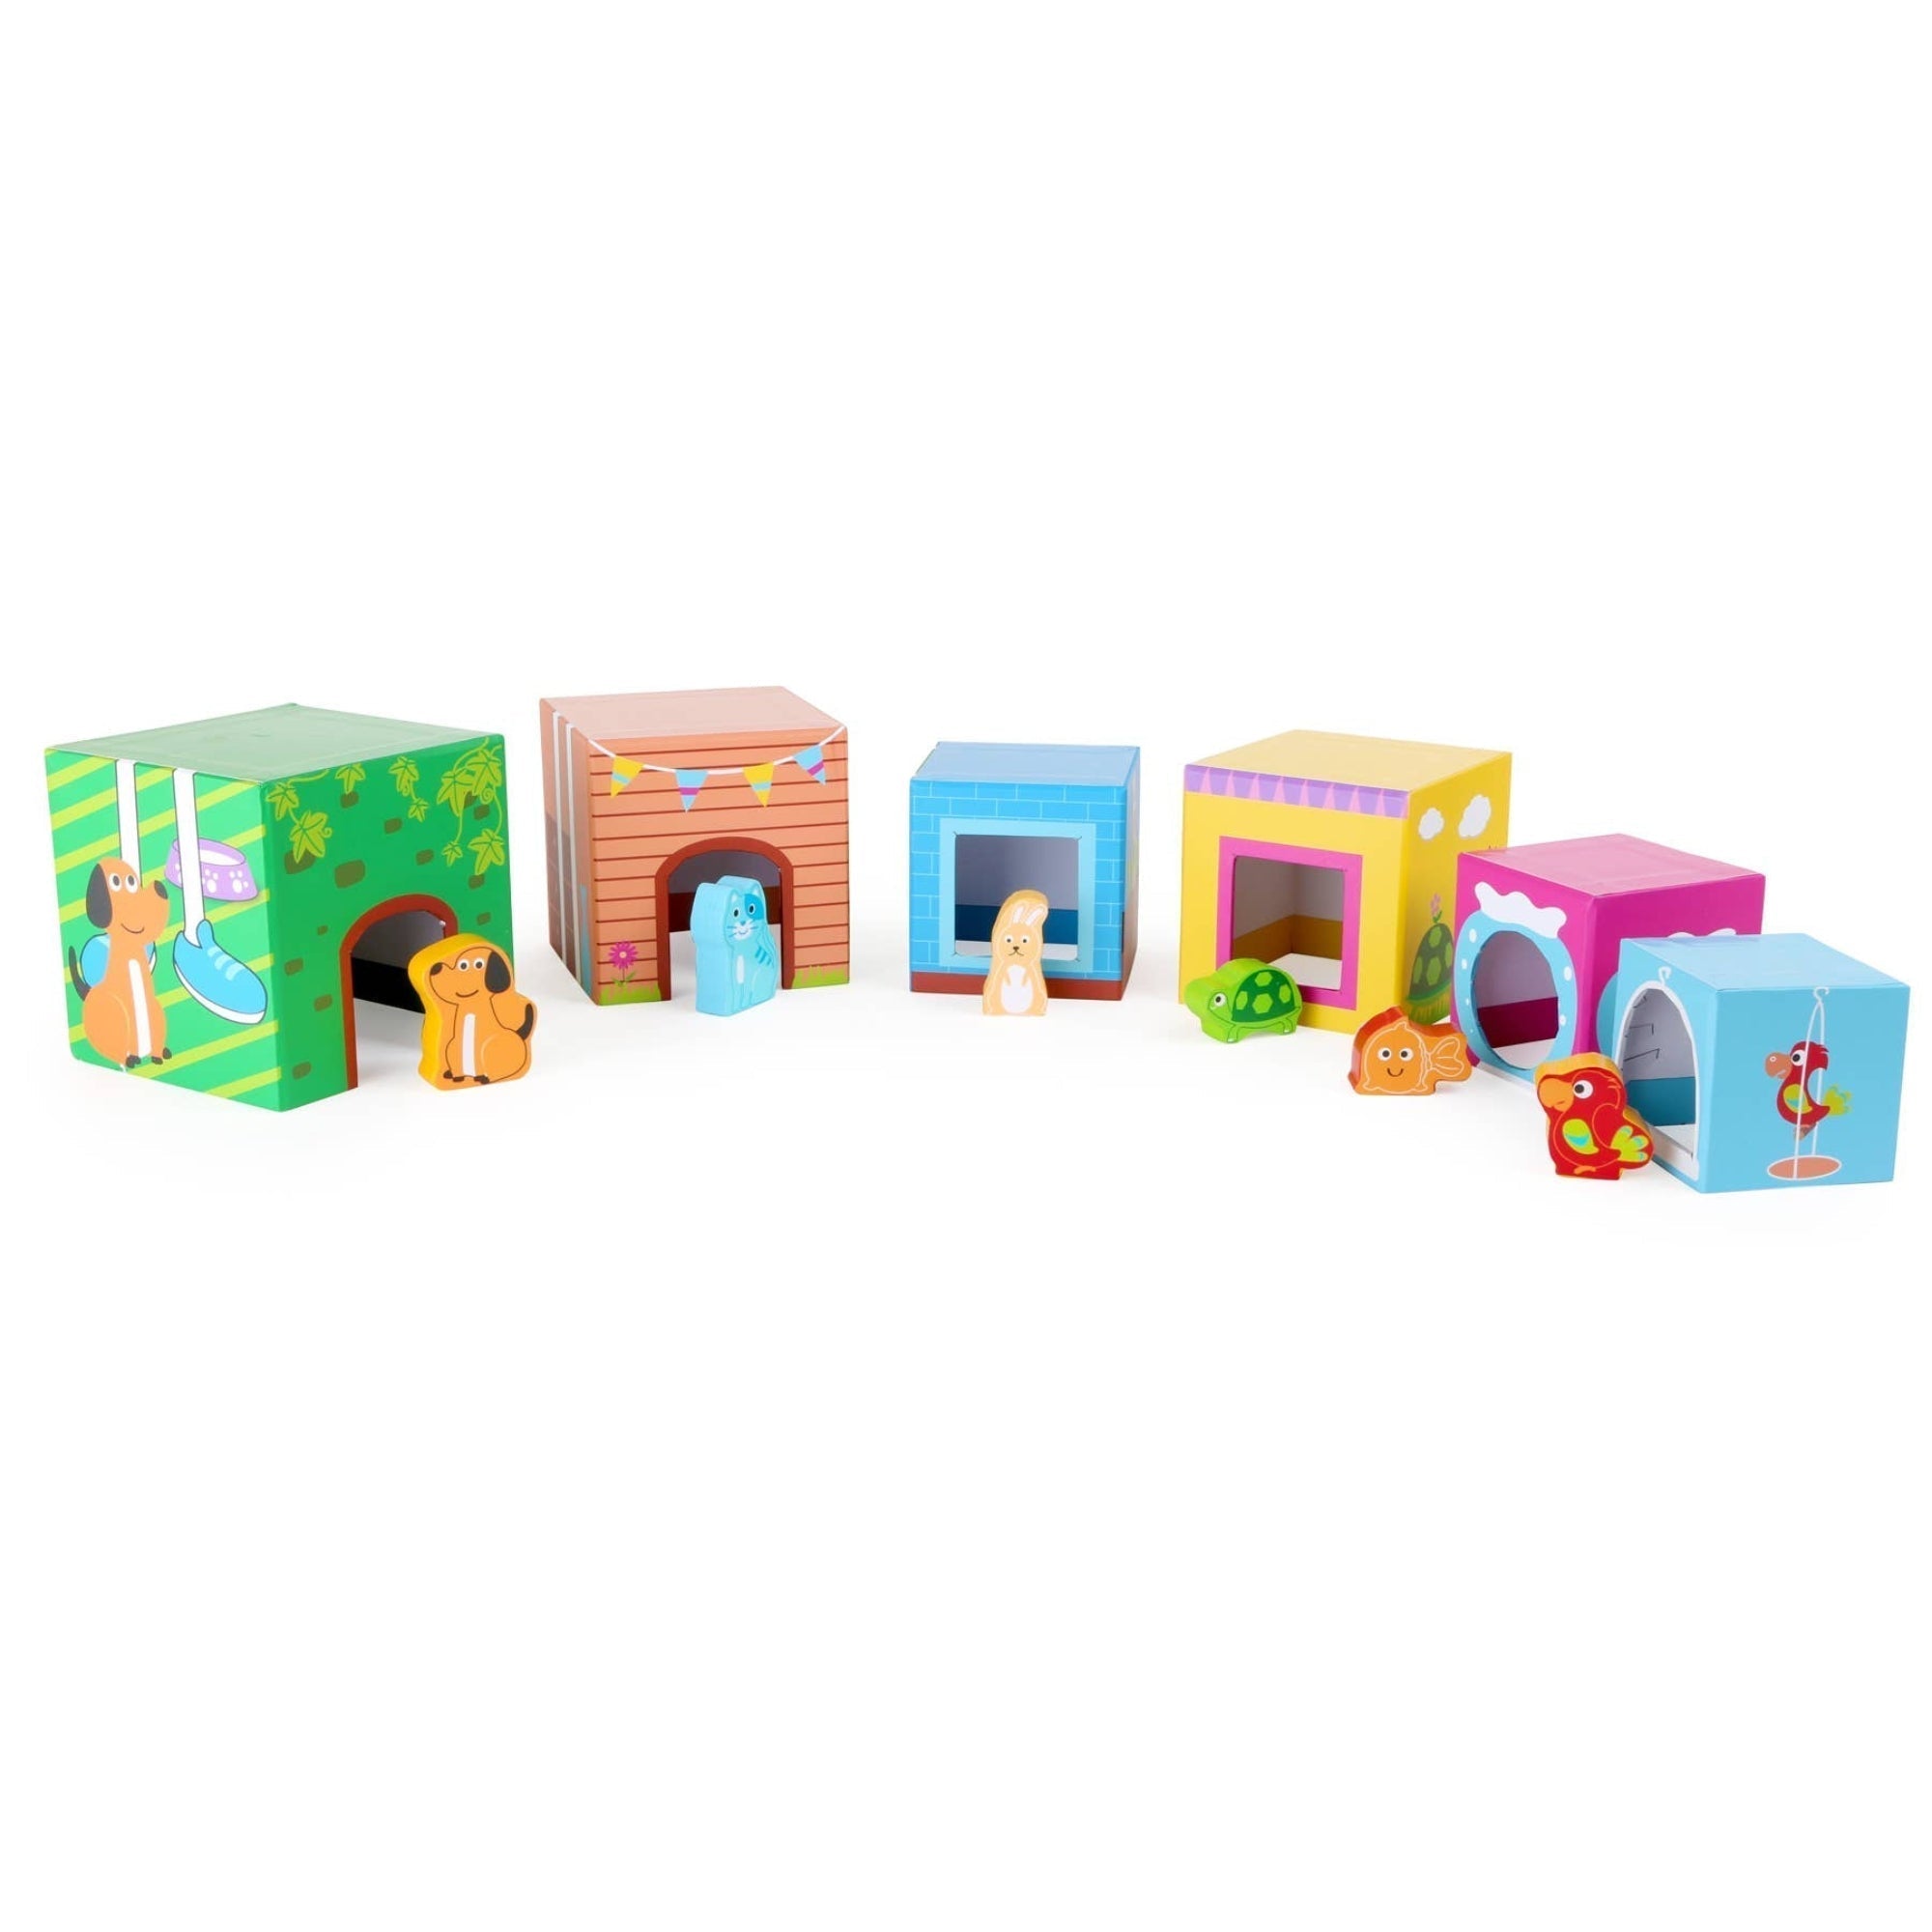 Stacking Cubes with Pets, Graduating in size, these delightful Stacking Cubes with Pets need to be stacked in the correct order, from largest to smallest, to create a tower. Each Stacking Cubes with Pets features a detailed pet scene, As little ones stack each Stacking Cubes with Pets, they can discuss the pet on one side, developing their language skills and vocabulary. Perfect for early learning, these cubes are a versatile learning aid. Stacking Cubes with Pets Once playtime is over, the stacking blocks 